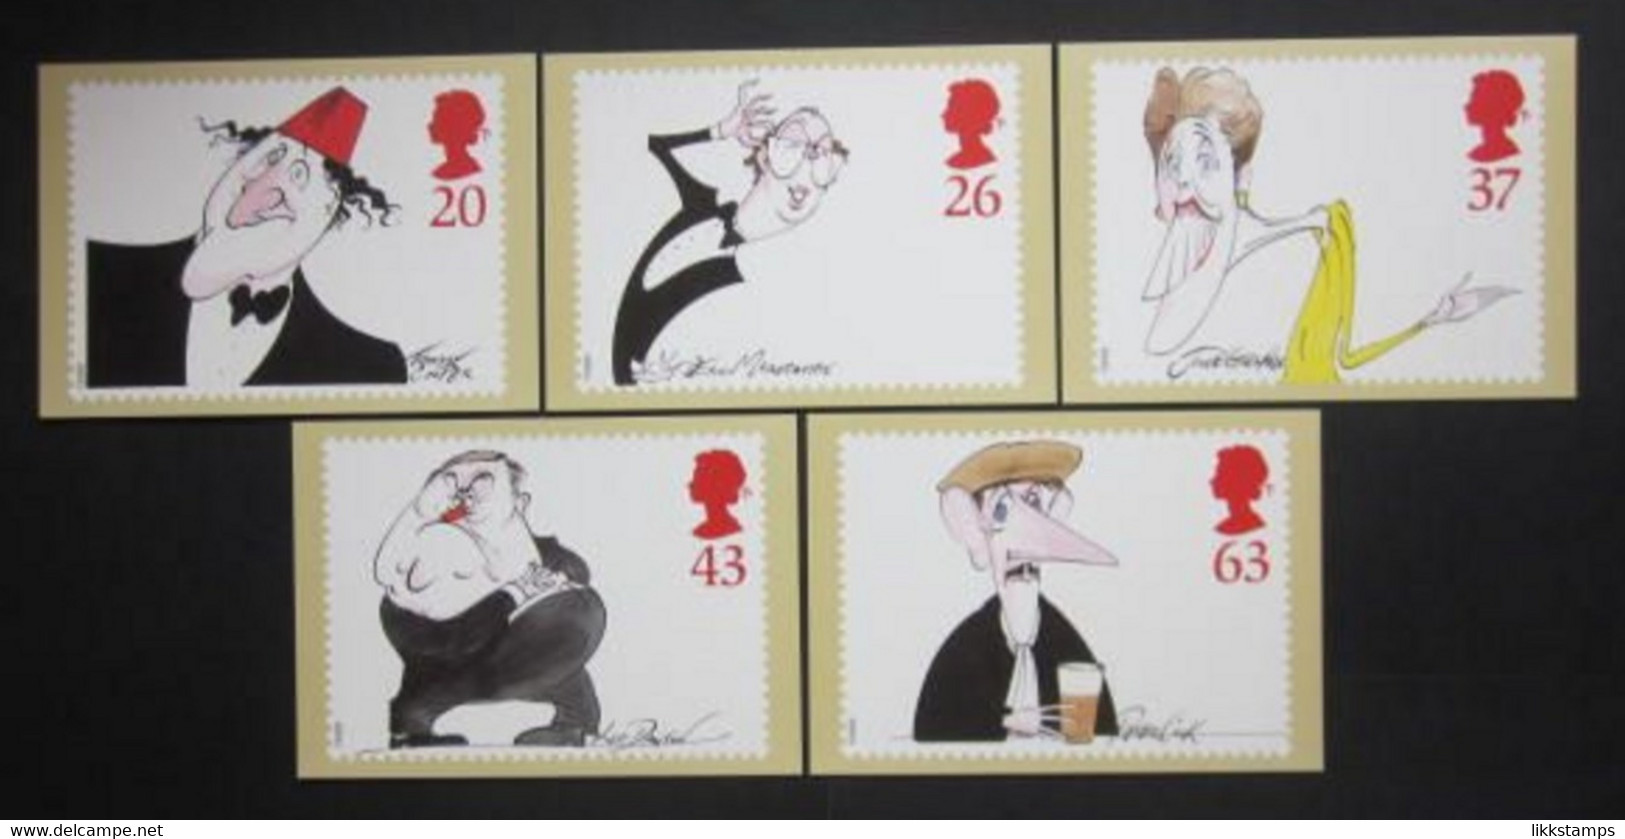 1998 COMEDIANS P.H.Q. CARDS UNUSED, ISSUE No. 197 (B) #00954 - Cartes PHQ